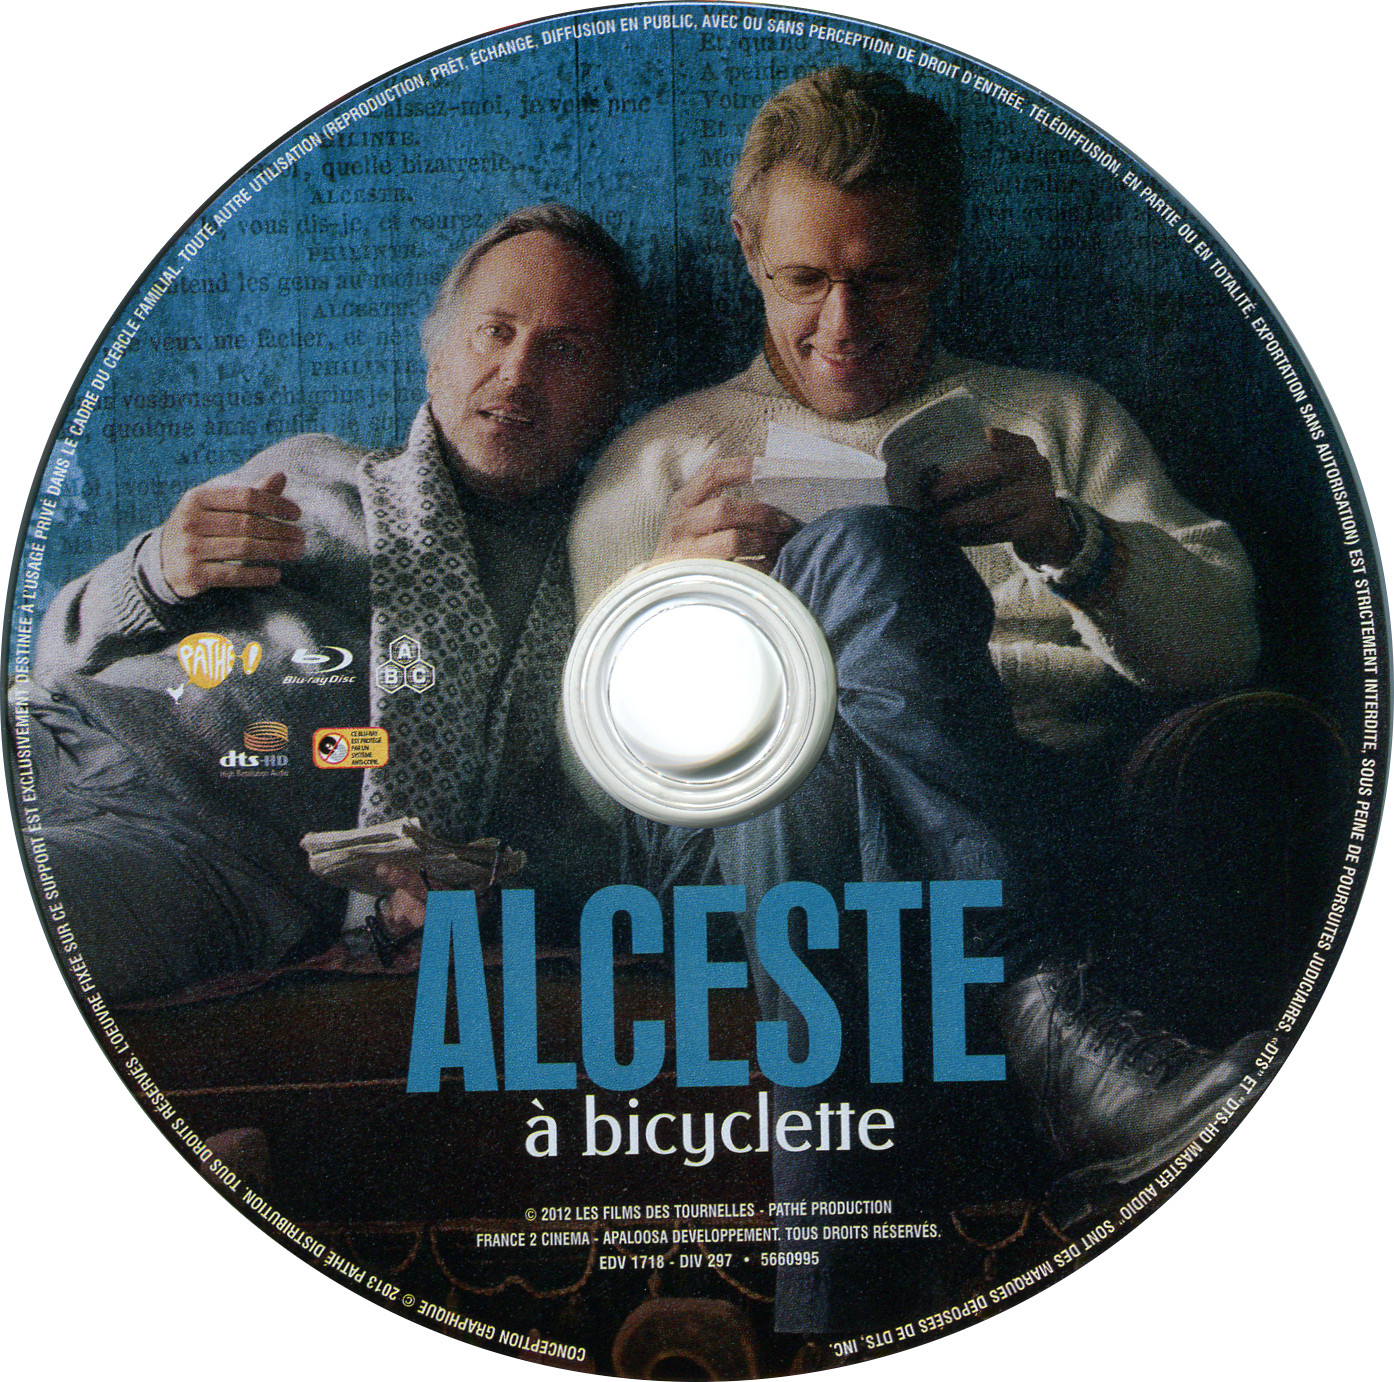 Alceste  bicyclette (BLU-RAY)